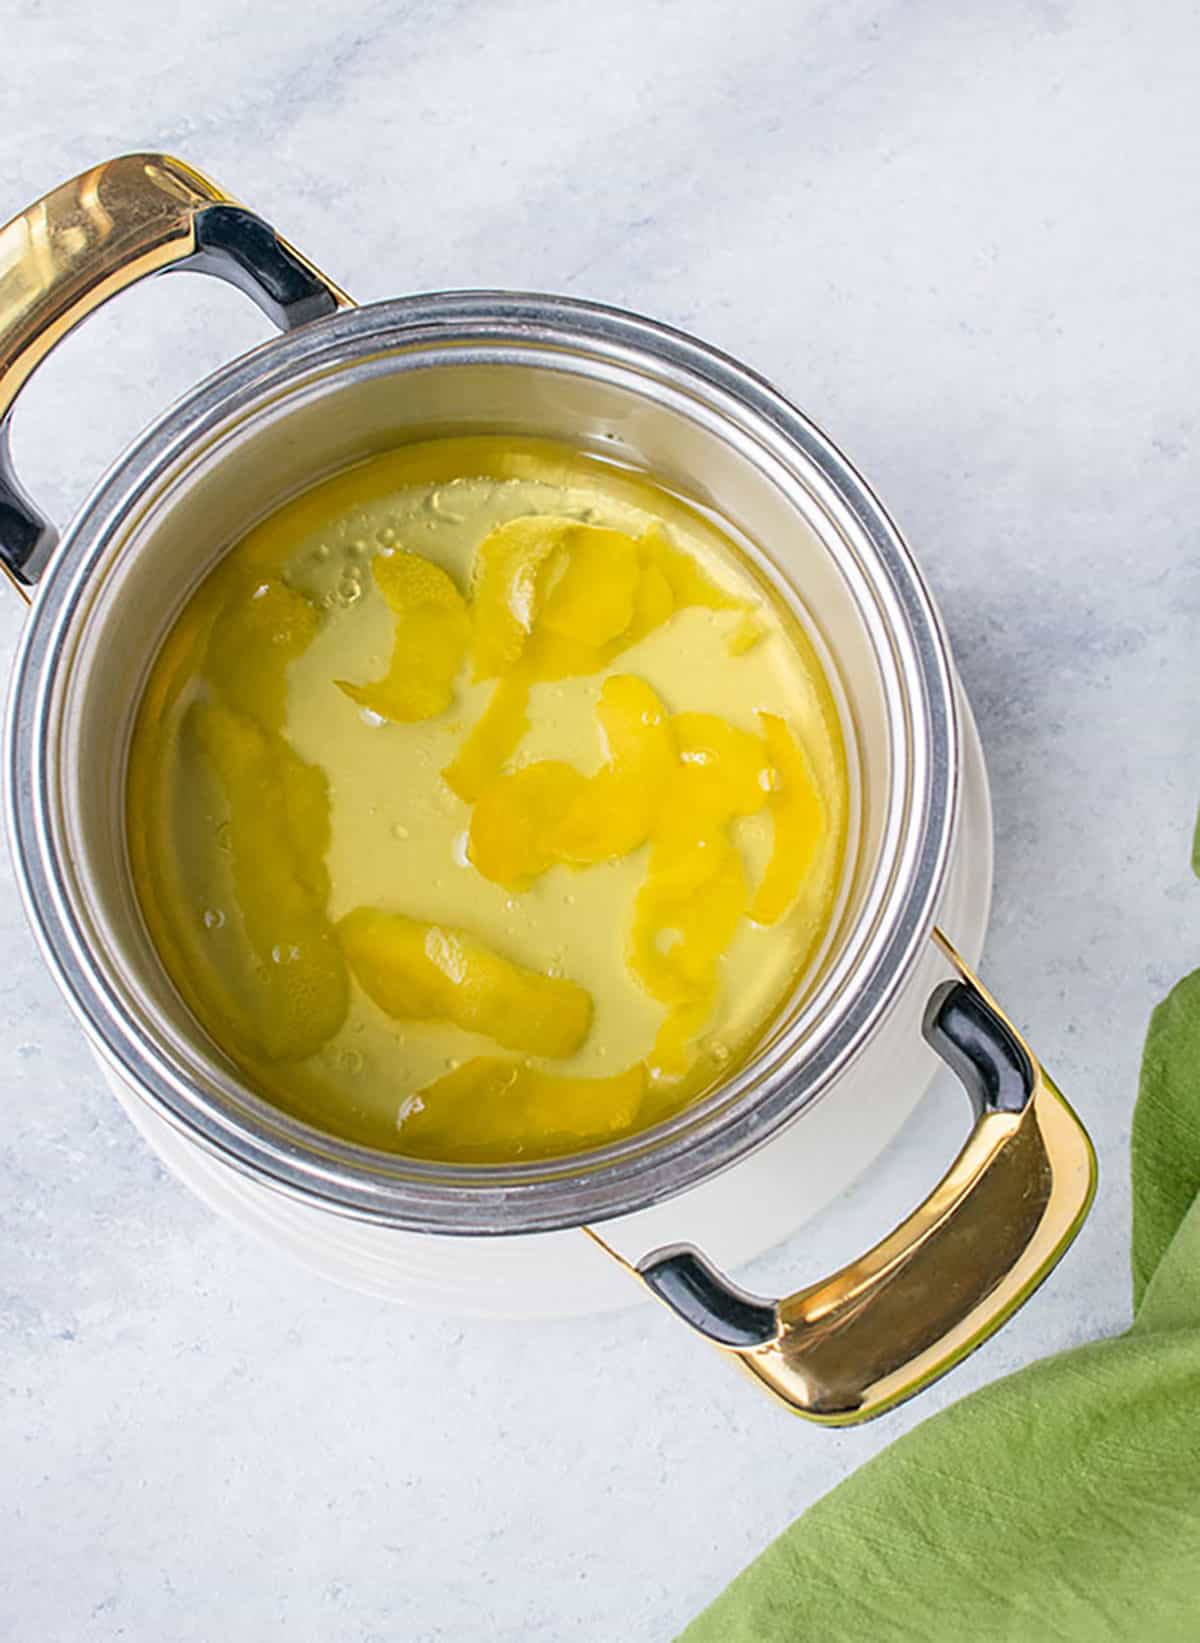 lemon peels and olive oil in a pot